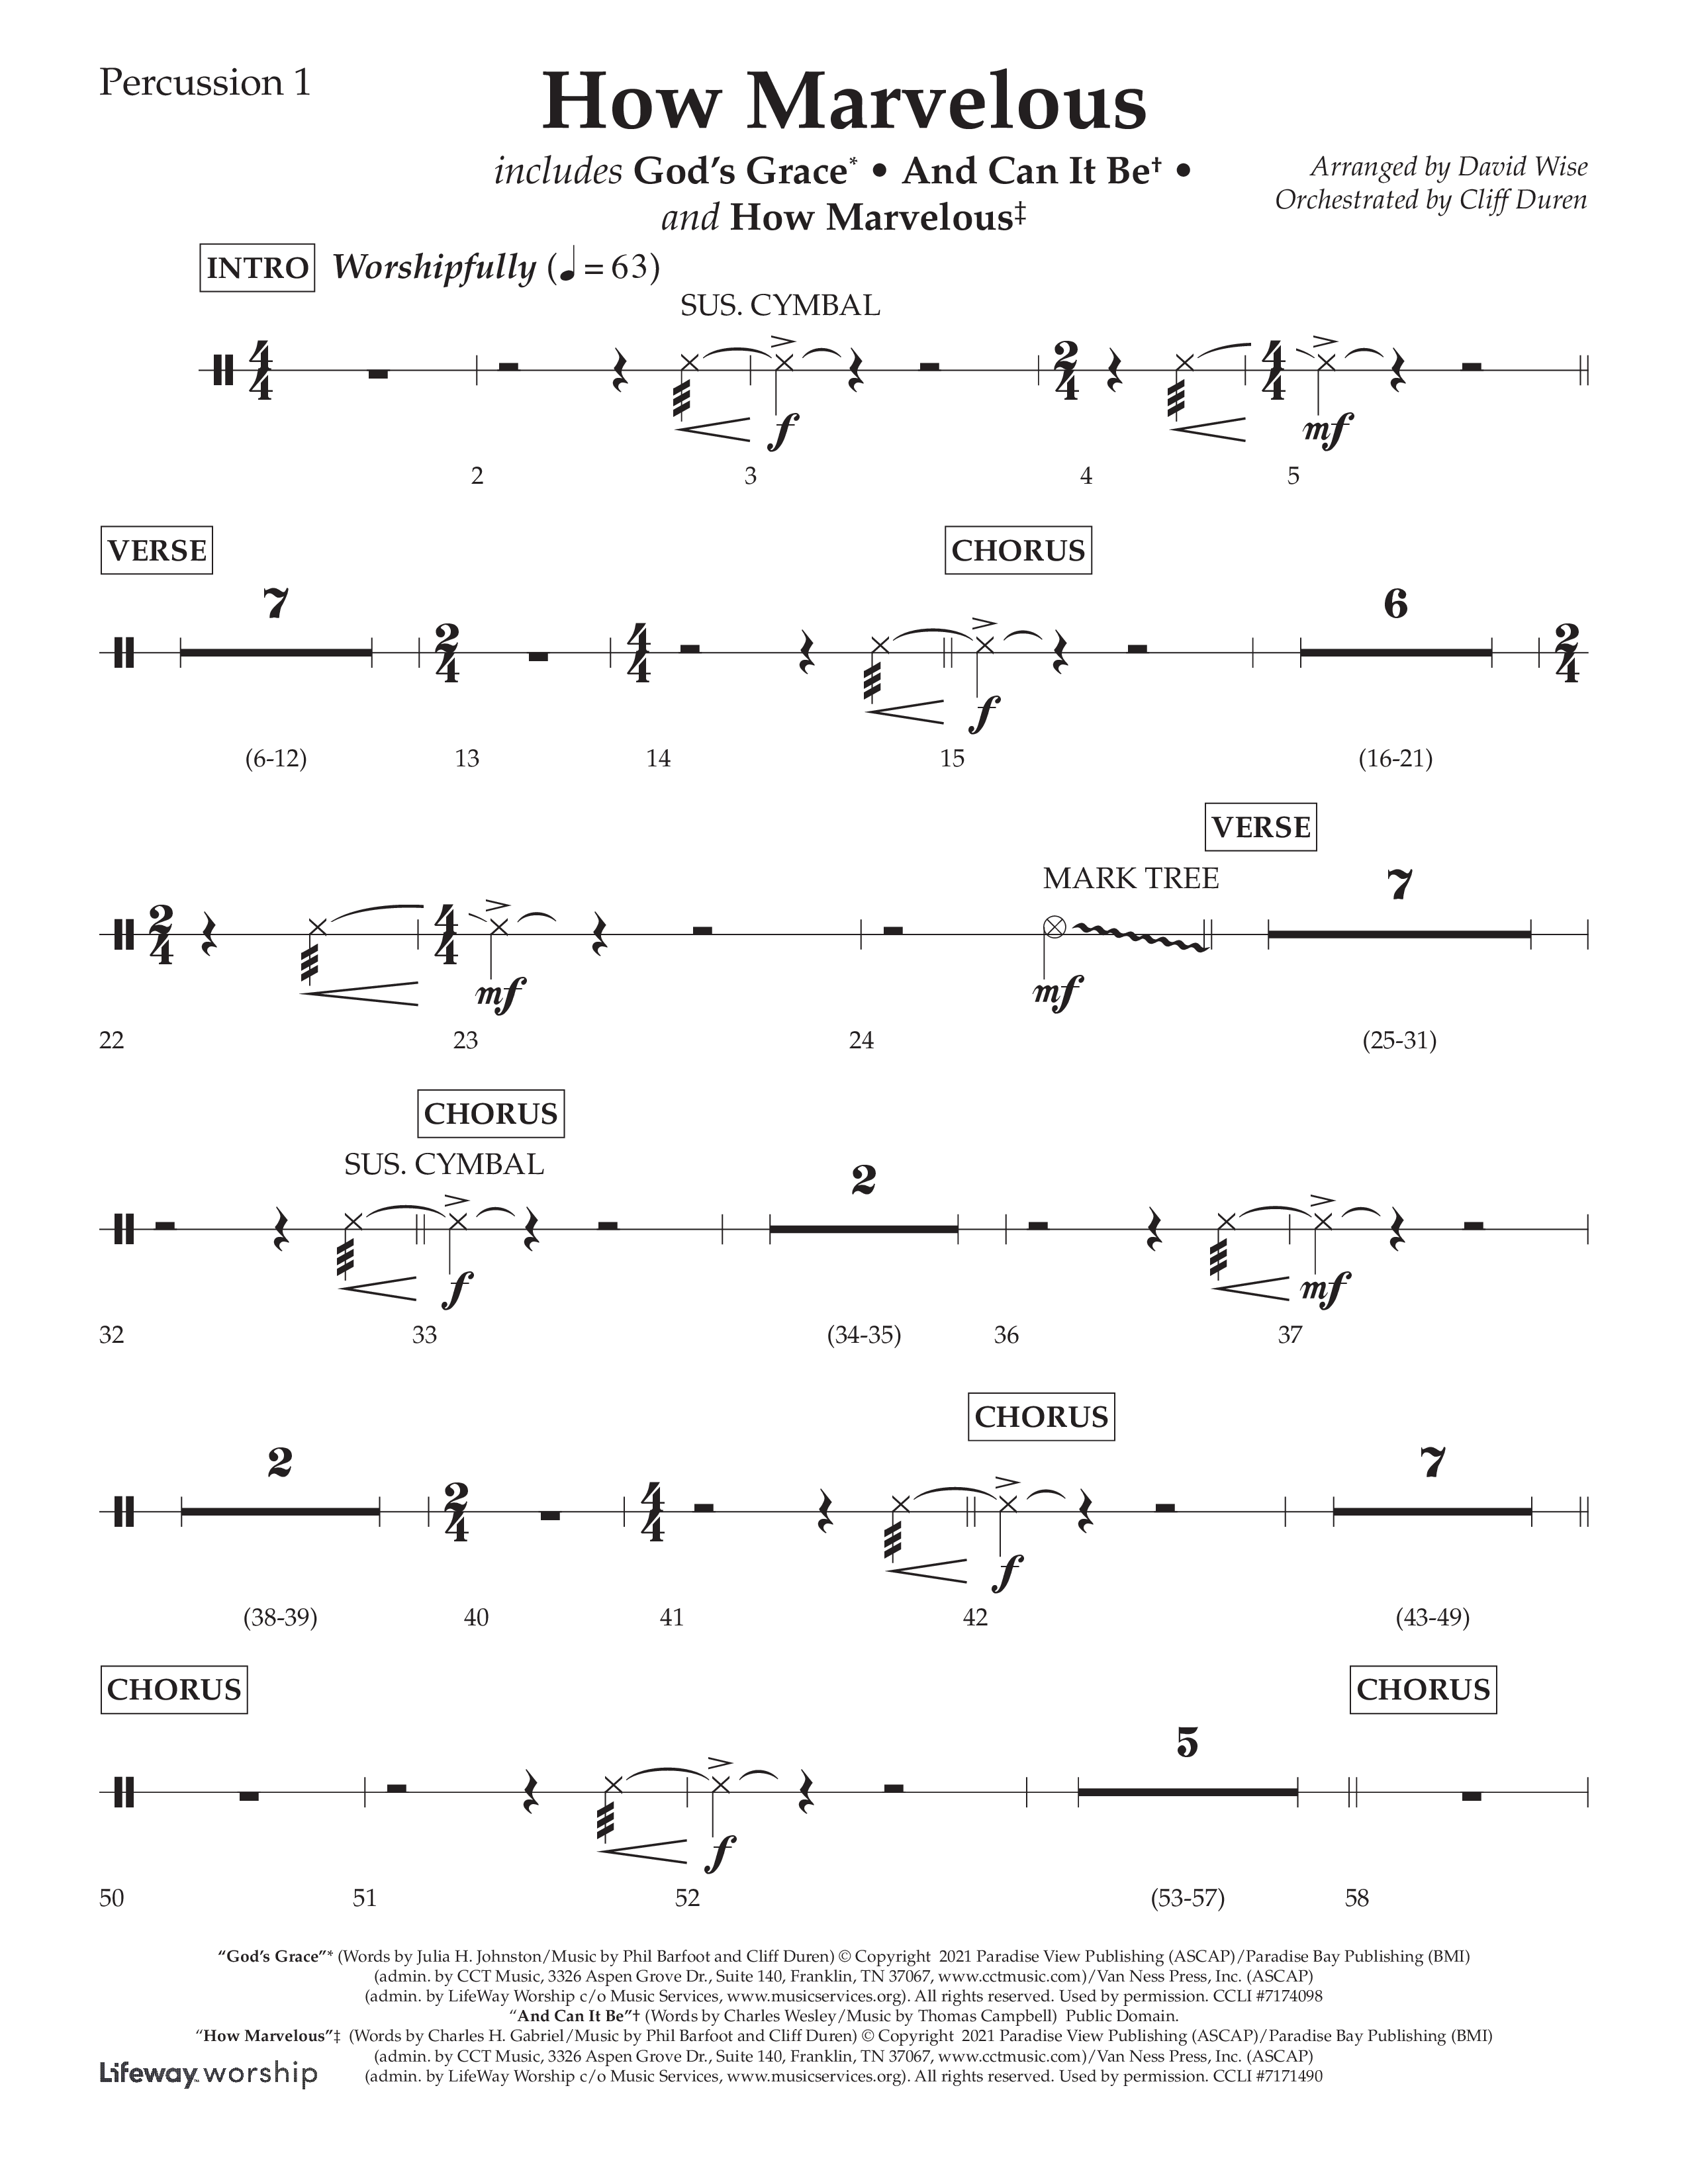 How Marvelous Medley (Choral Anthem SATB) Percussion 1/2 (Lifeway Choral / Arr. David Wise / Orch. Cliff Duren)